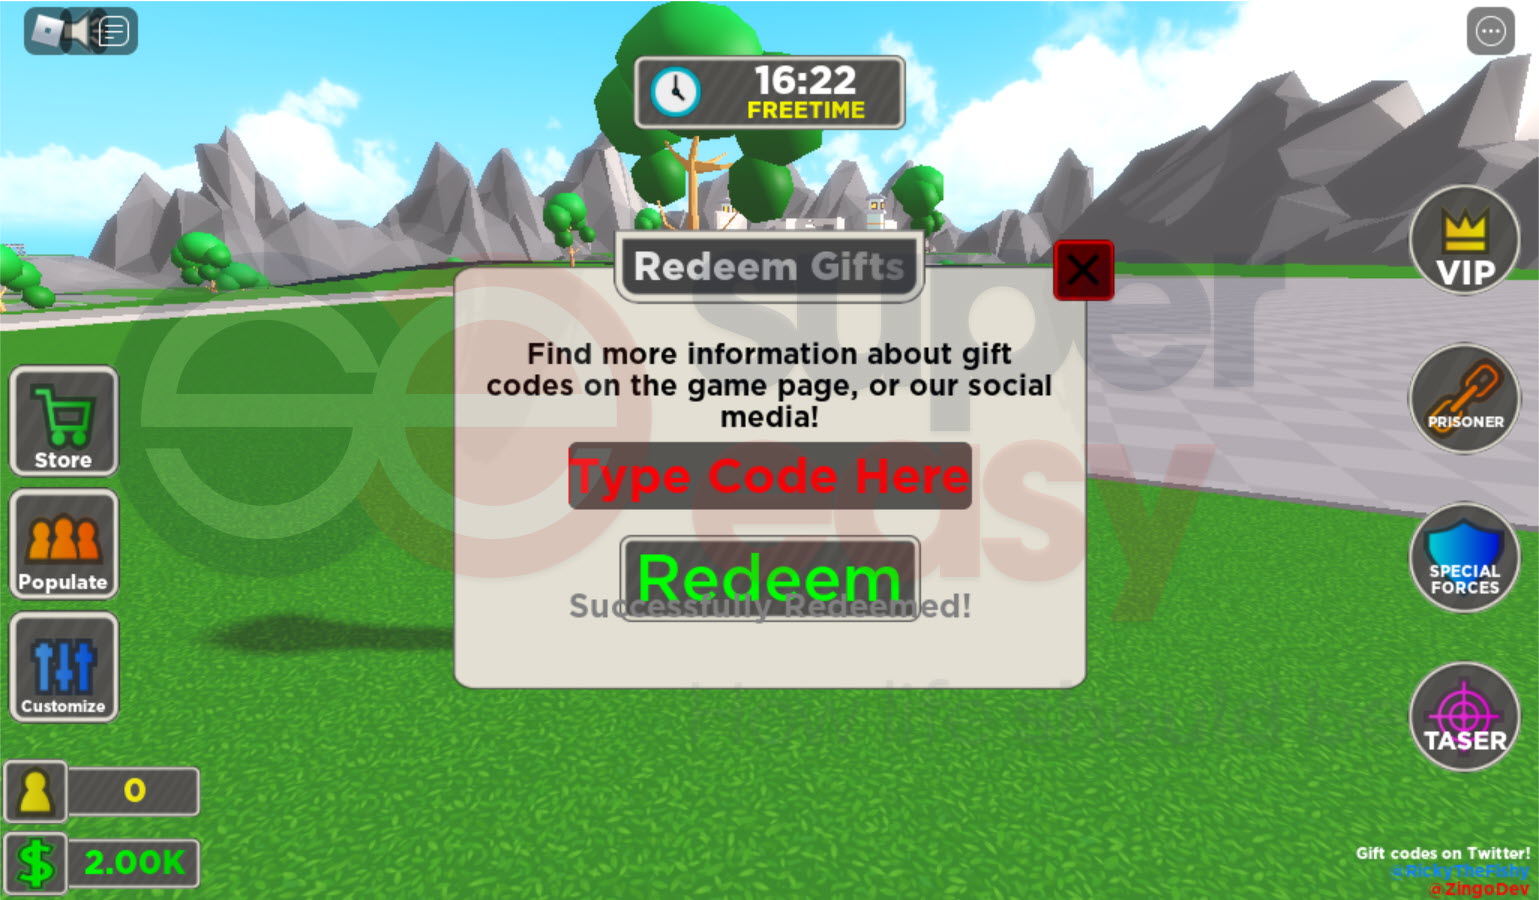 New Roblox Jail Tycoon Codes Jul 2021 Super Easy - roblox social media tycoon codes